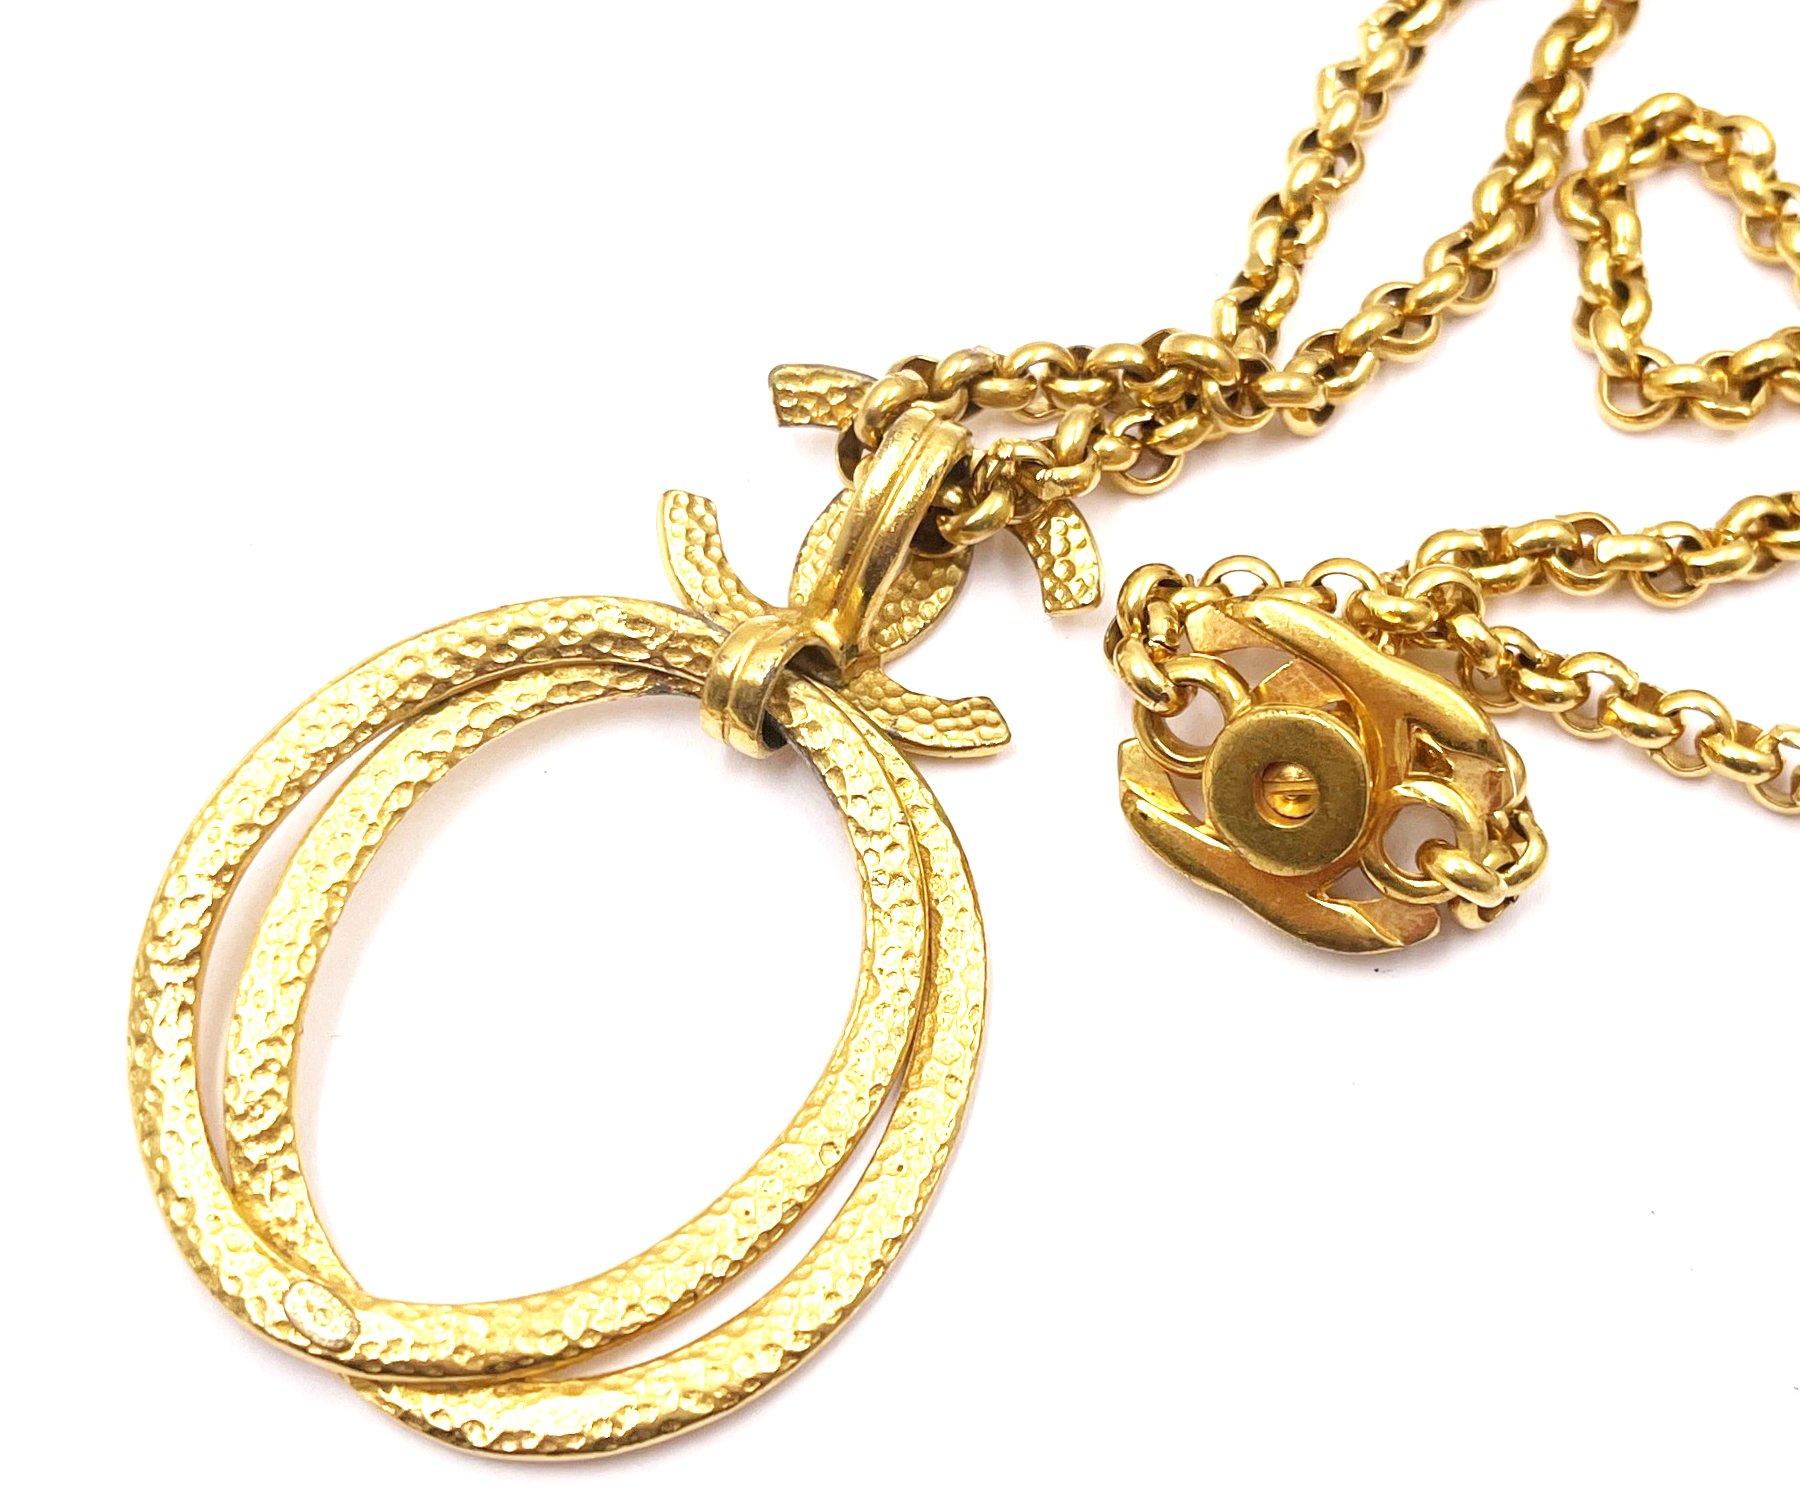 Women's or Men's Chanel Vintage Rare Gold Plated CC Ring Turnlock Necklace For Sale